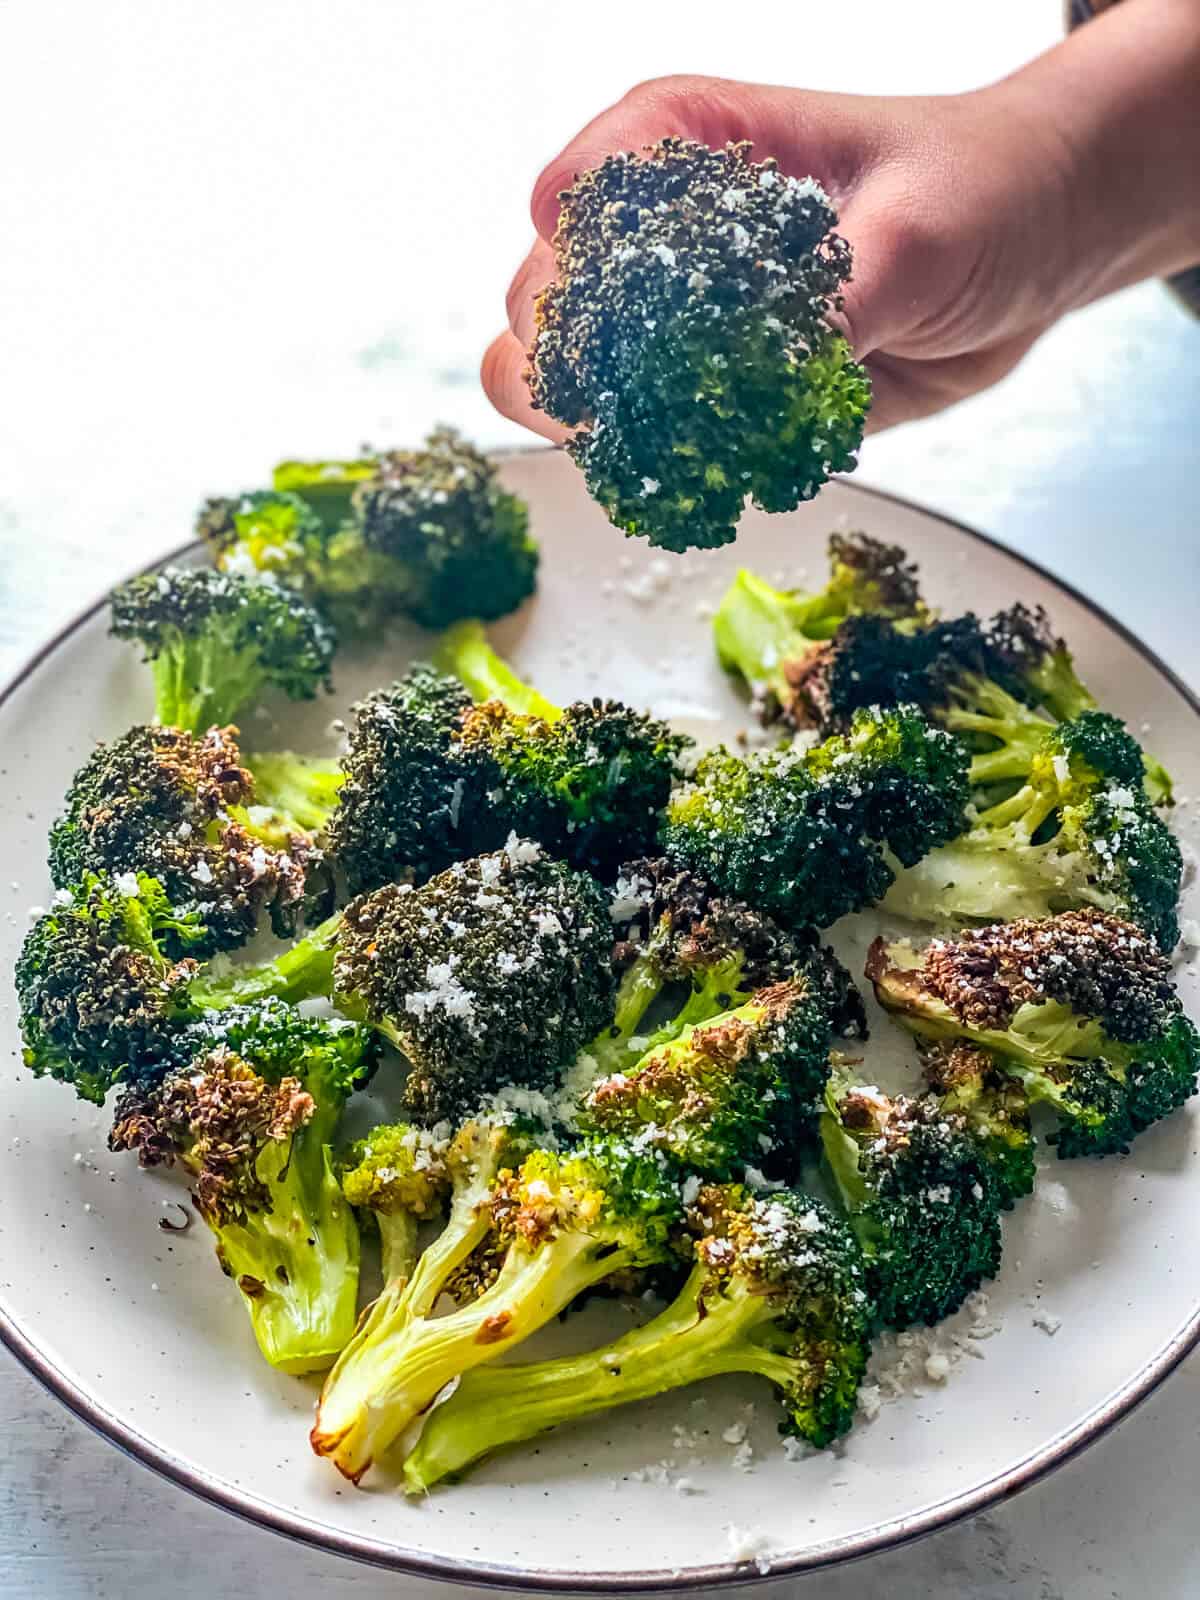 A hand shows a large floret of roasted broccoli, being pulled from a large white plate full of broccoli florets.